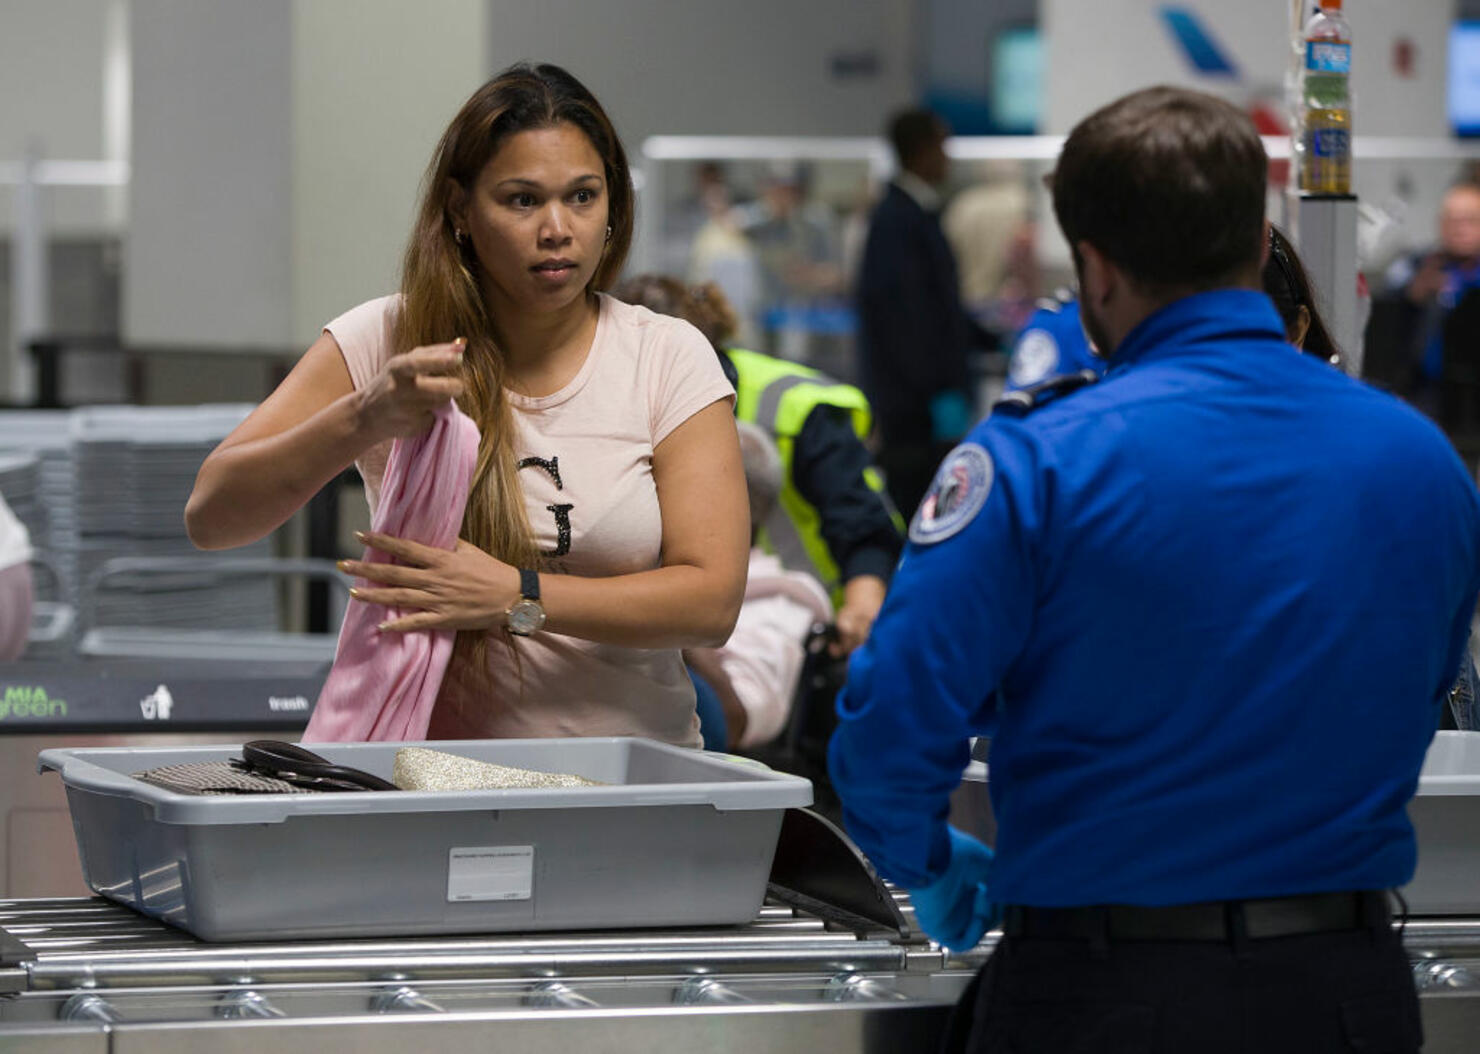 New 3-D Explosives Scanner Installed At TSA Checkpoint At Miami Airport